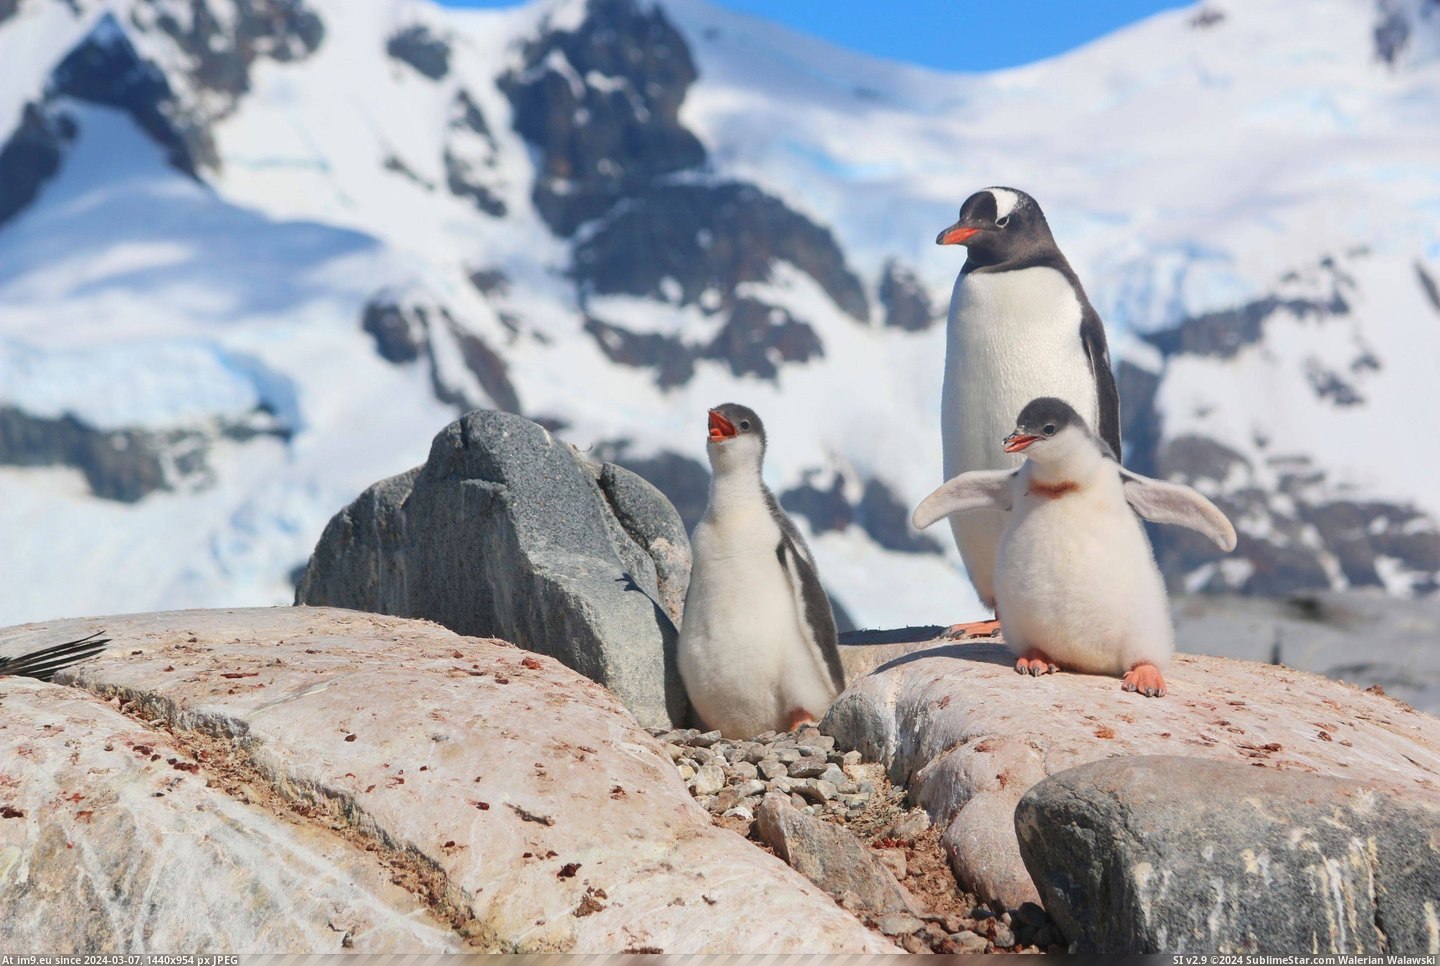 #Wallpaper #Beautiful #Happy #Snow #Highres #Antarctica #Opportunity #Family #Month #Visit #Ran [Aww] Last month I had the opportunity to visit Antarctica, where I ran into this happy family! Pic. (Изображение из альбом My r/AWW favs))